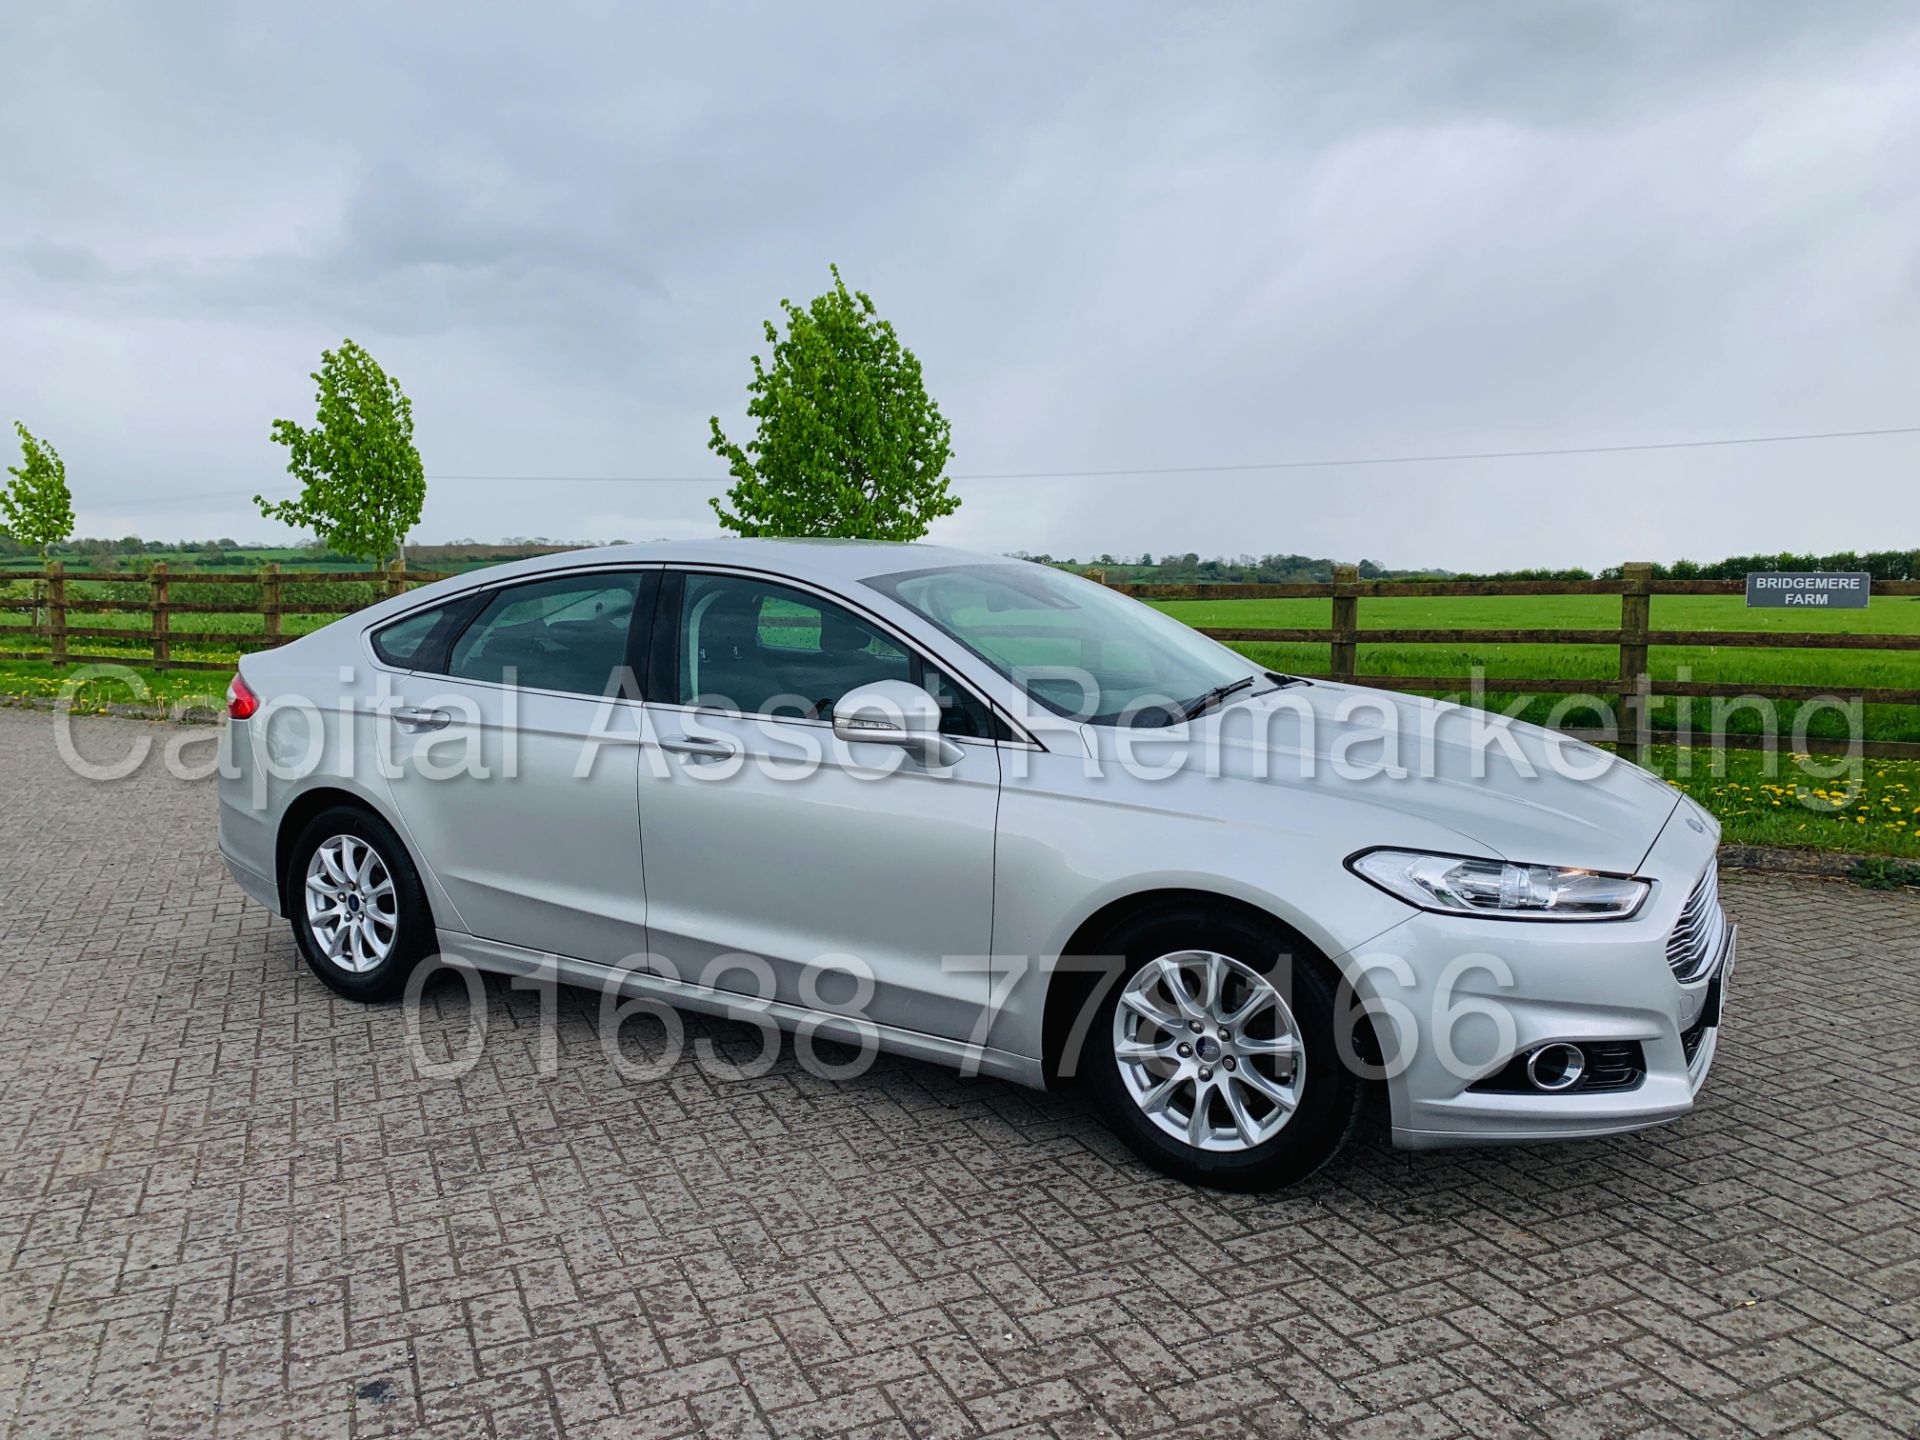 FORD MONDEO *TITANIUM* HATCHBACK (2016) '1.5 TDCI - EURO 6 - 6 SPEED' *1 OWNER - FULL HISTORY* - Image 11 of 46